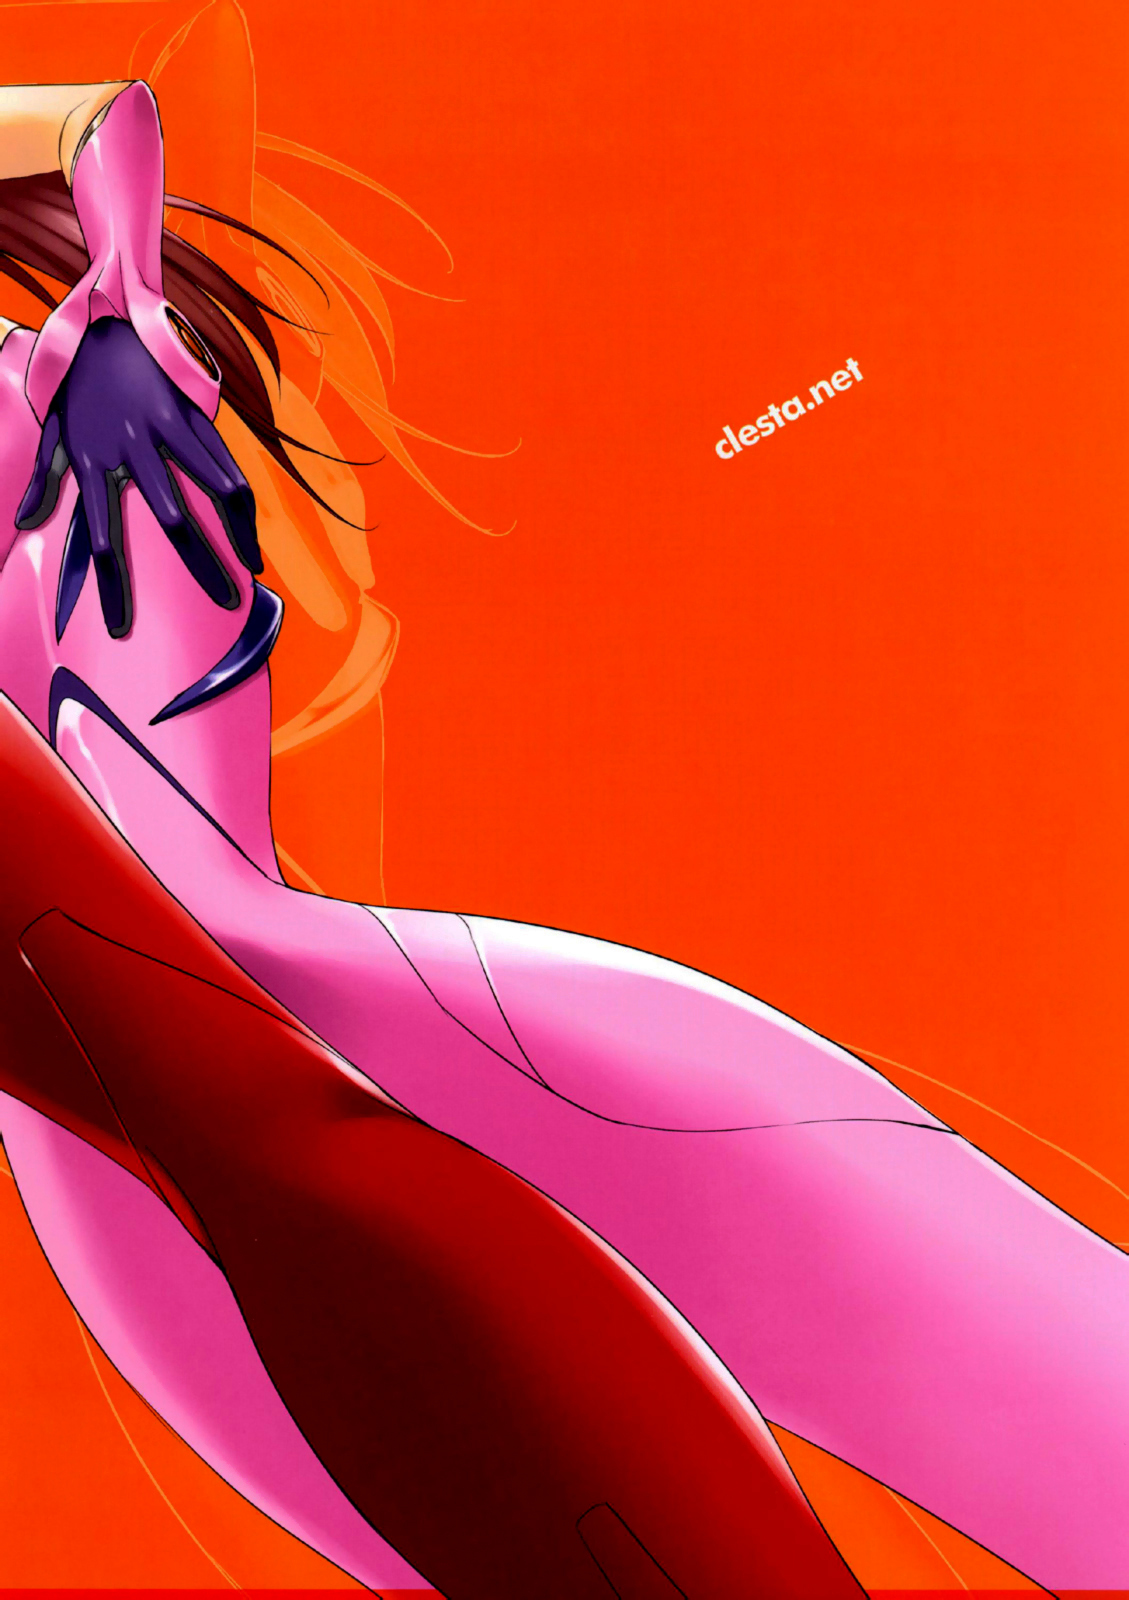 (C79) [Clesta (Kure Masahiro)] CL-orz：13 YOU CAN (NOT) ADVANCE. (Neon Genesis Evangelion) [German] [Decensored] (C79) (同人誌) [クレスタ (呉マサヒロ)] CL-orz：13 YOU CAN (NOT) ADVANCE. (新世紀エヴァンゲリオン)